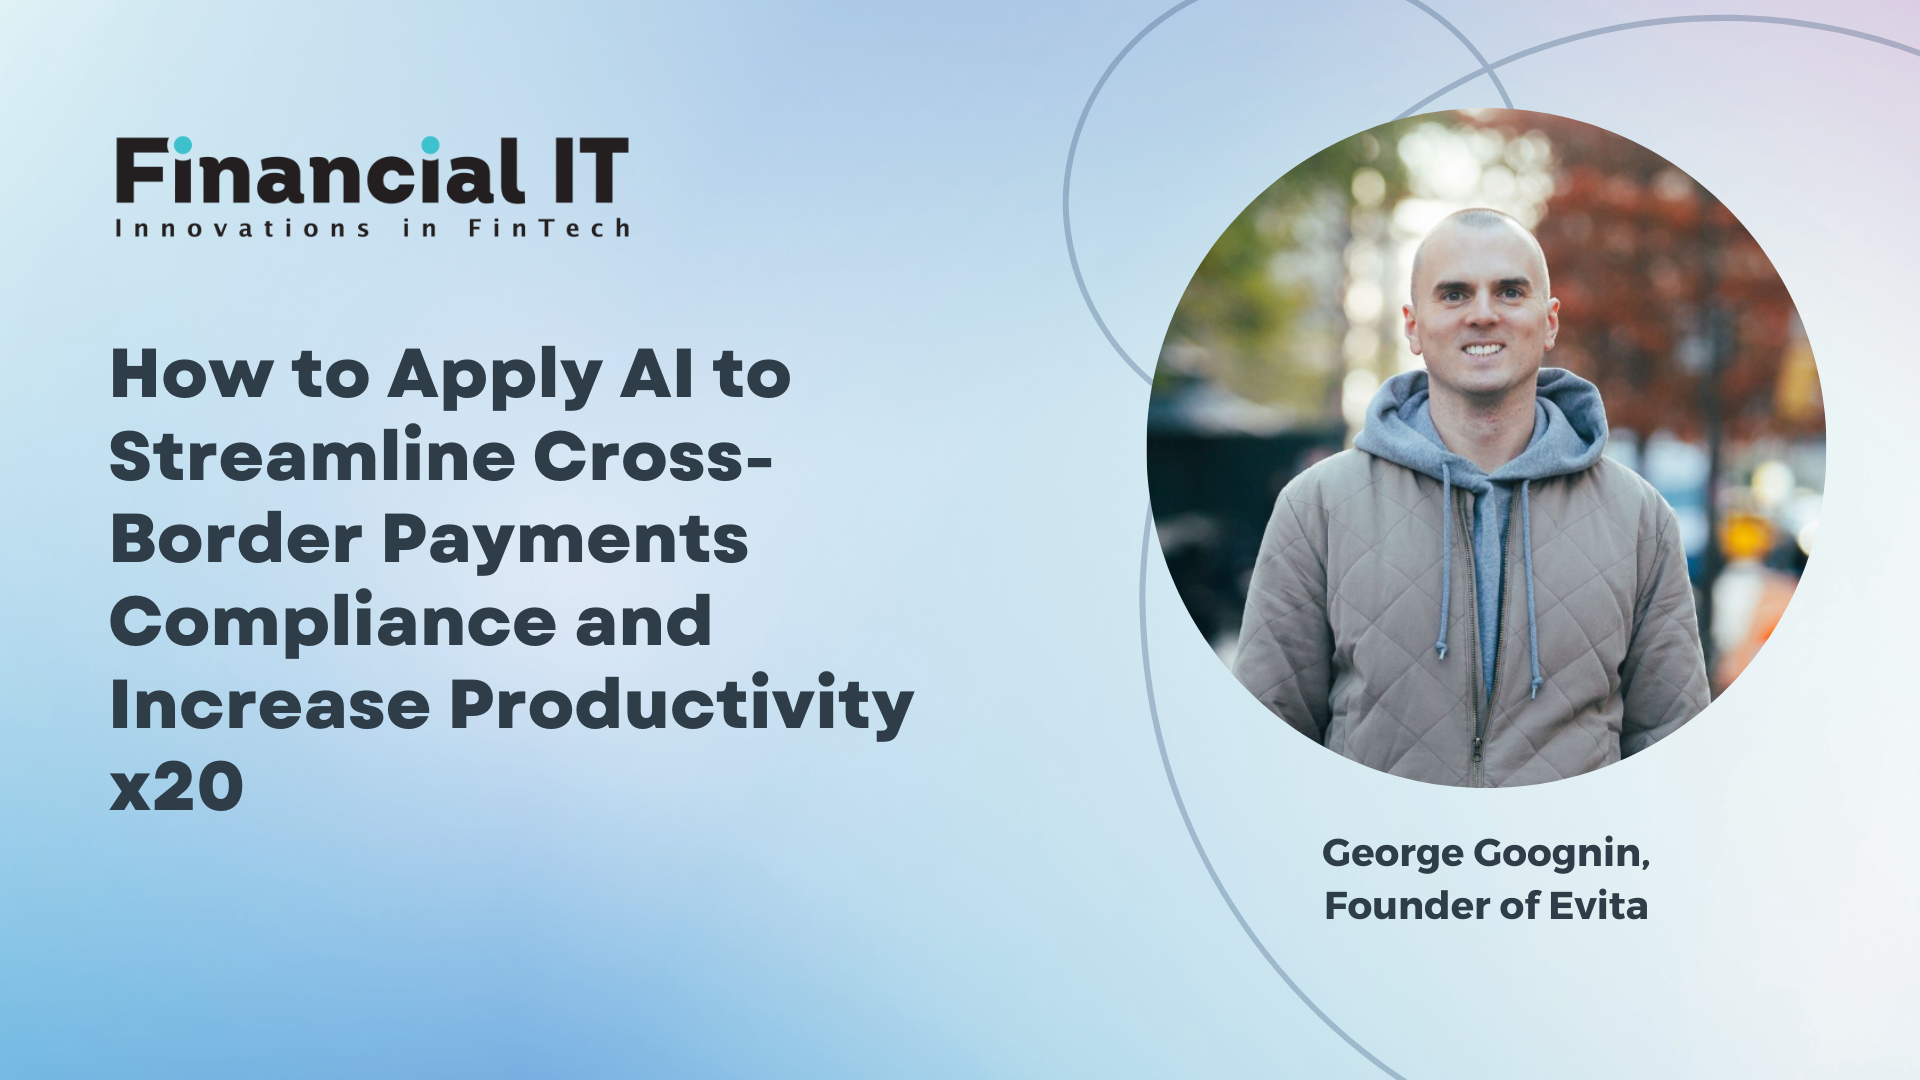 How to Apply AI to Streamline Cross-Border Payments Compliance and Increase Productivity x20